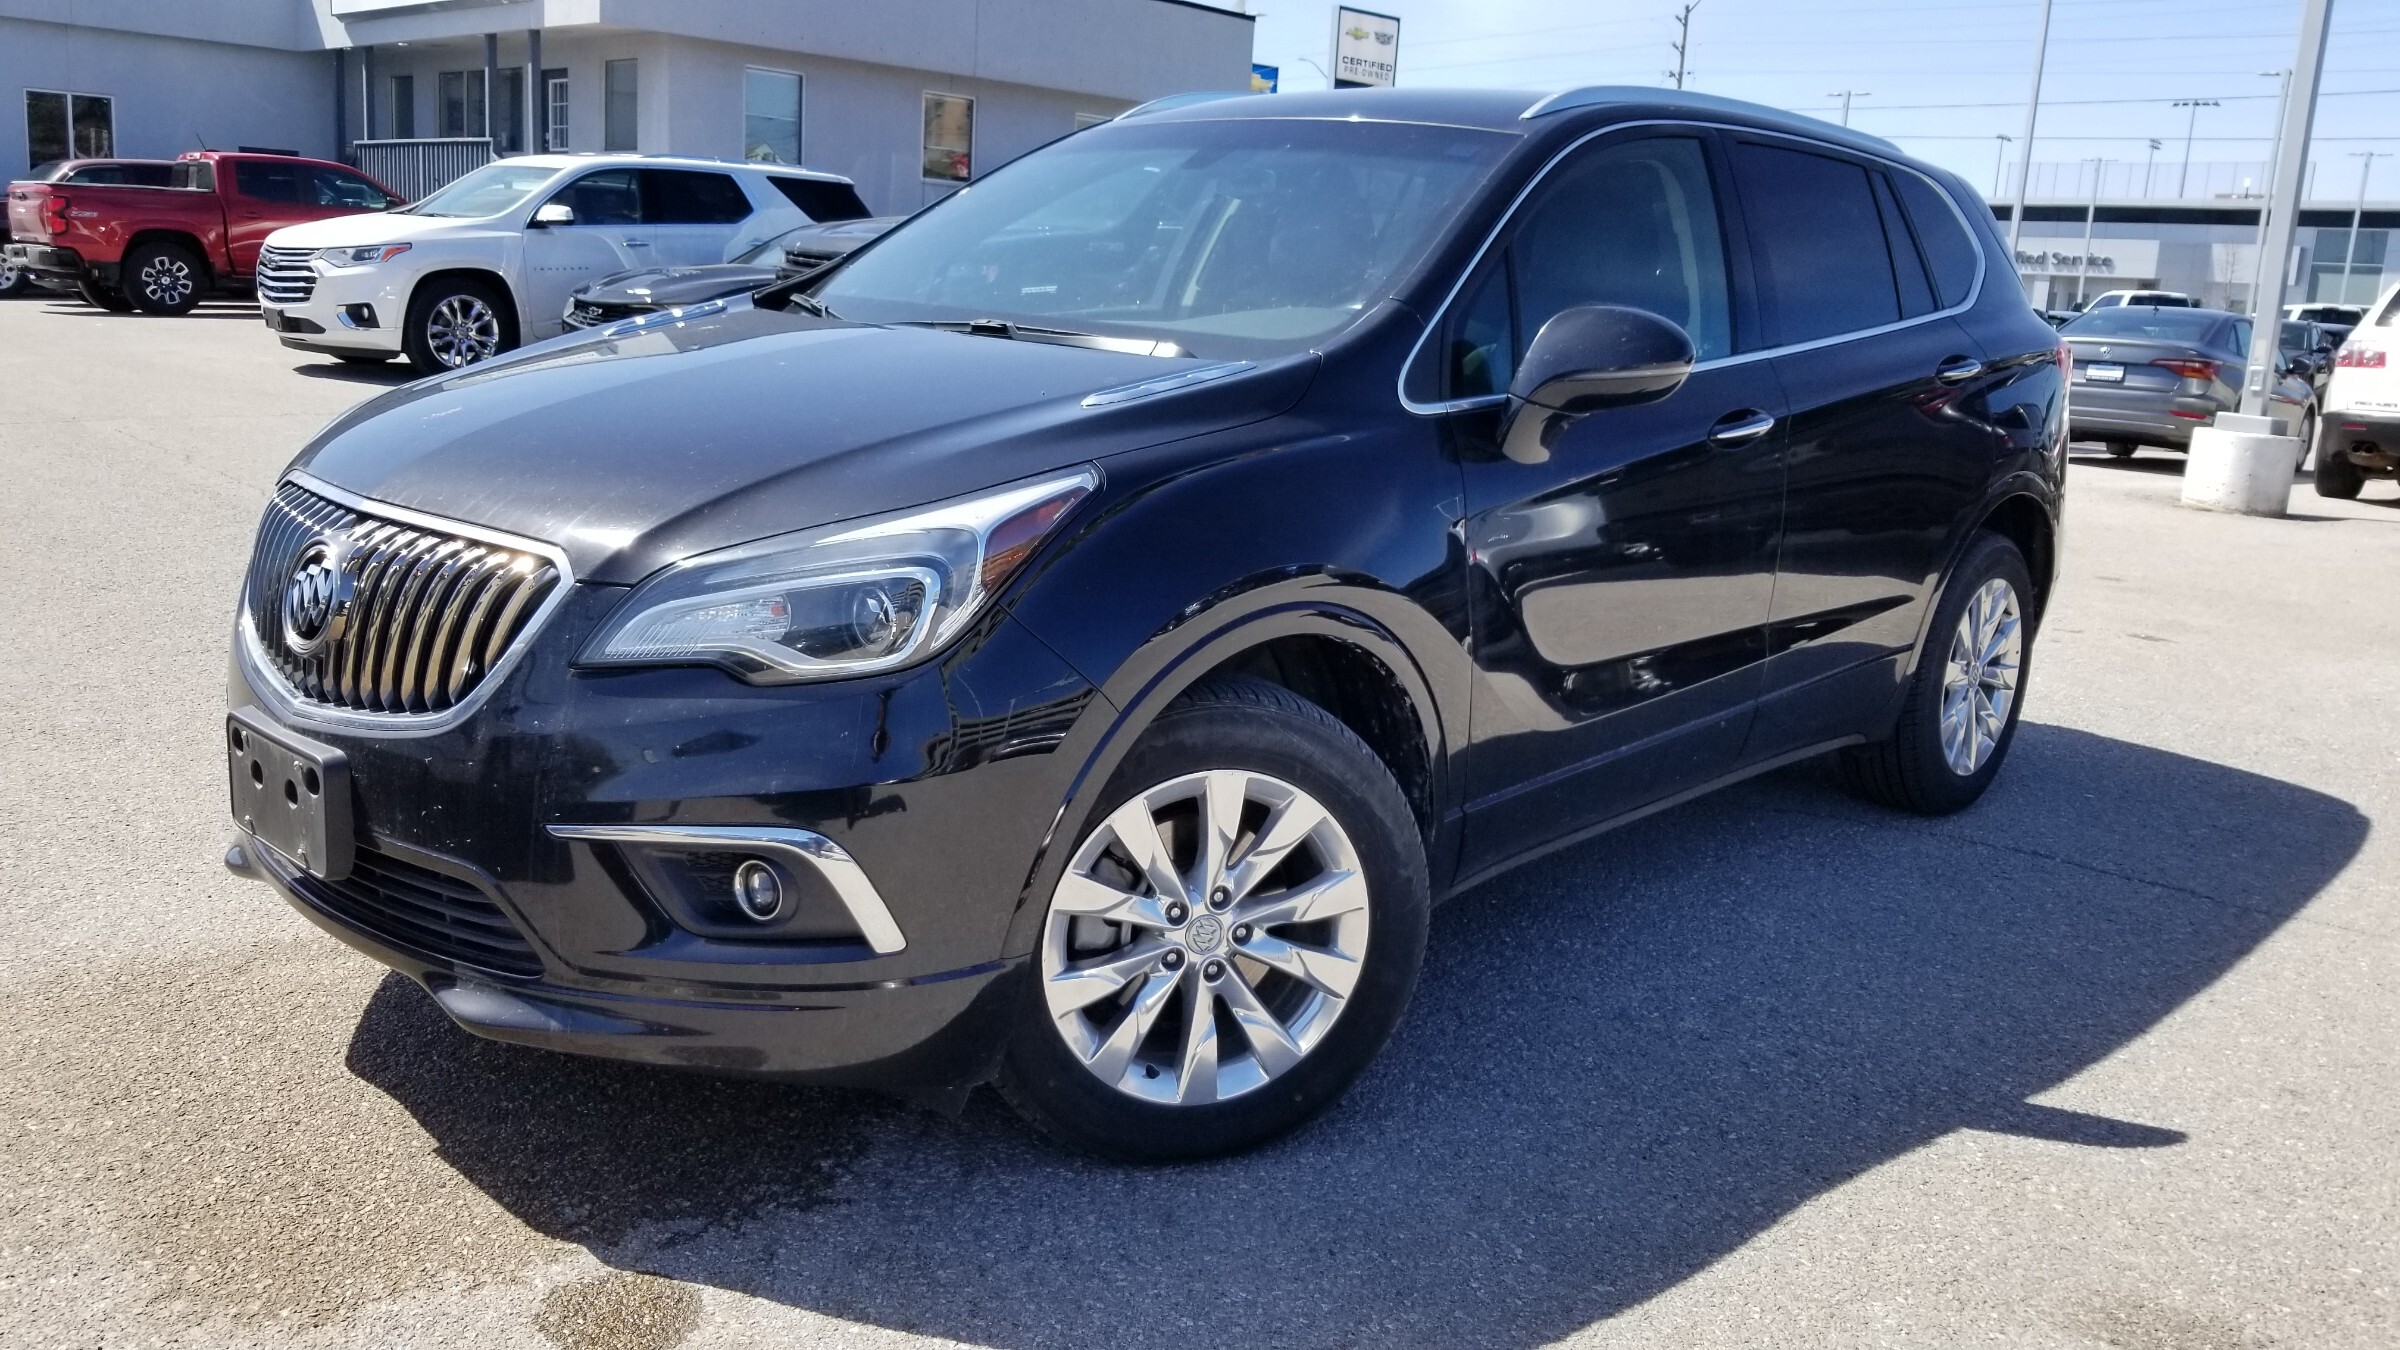 2018 Buick Envision Cargo Pkg / AWD / Hands-Free Power Lift Gate / Hea